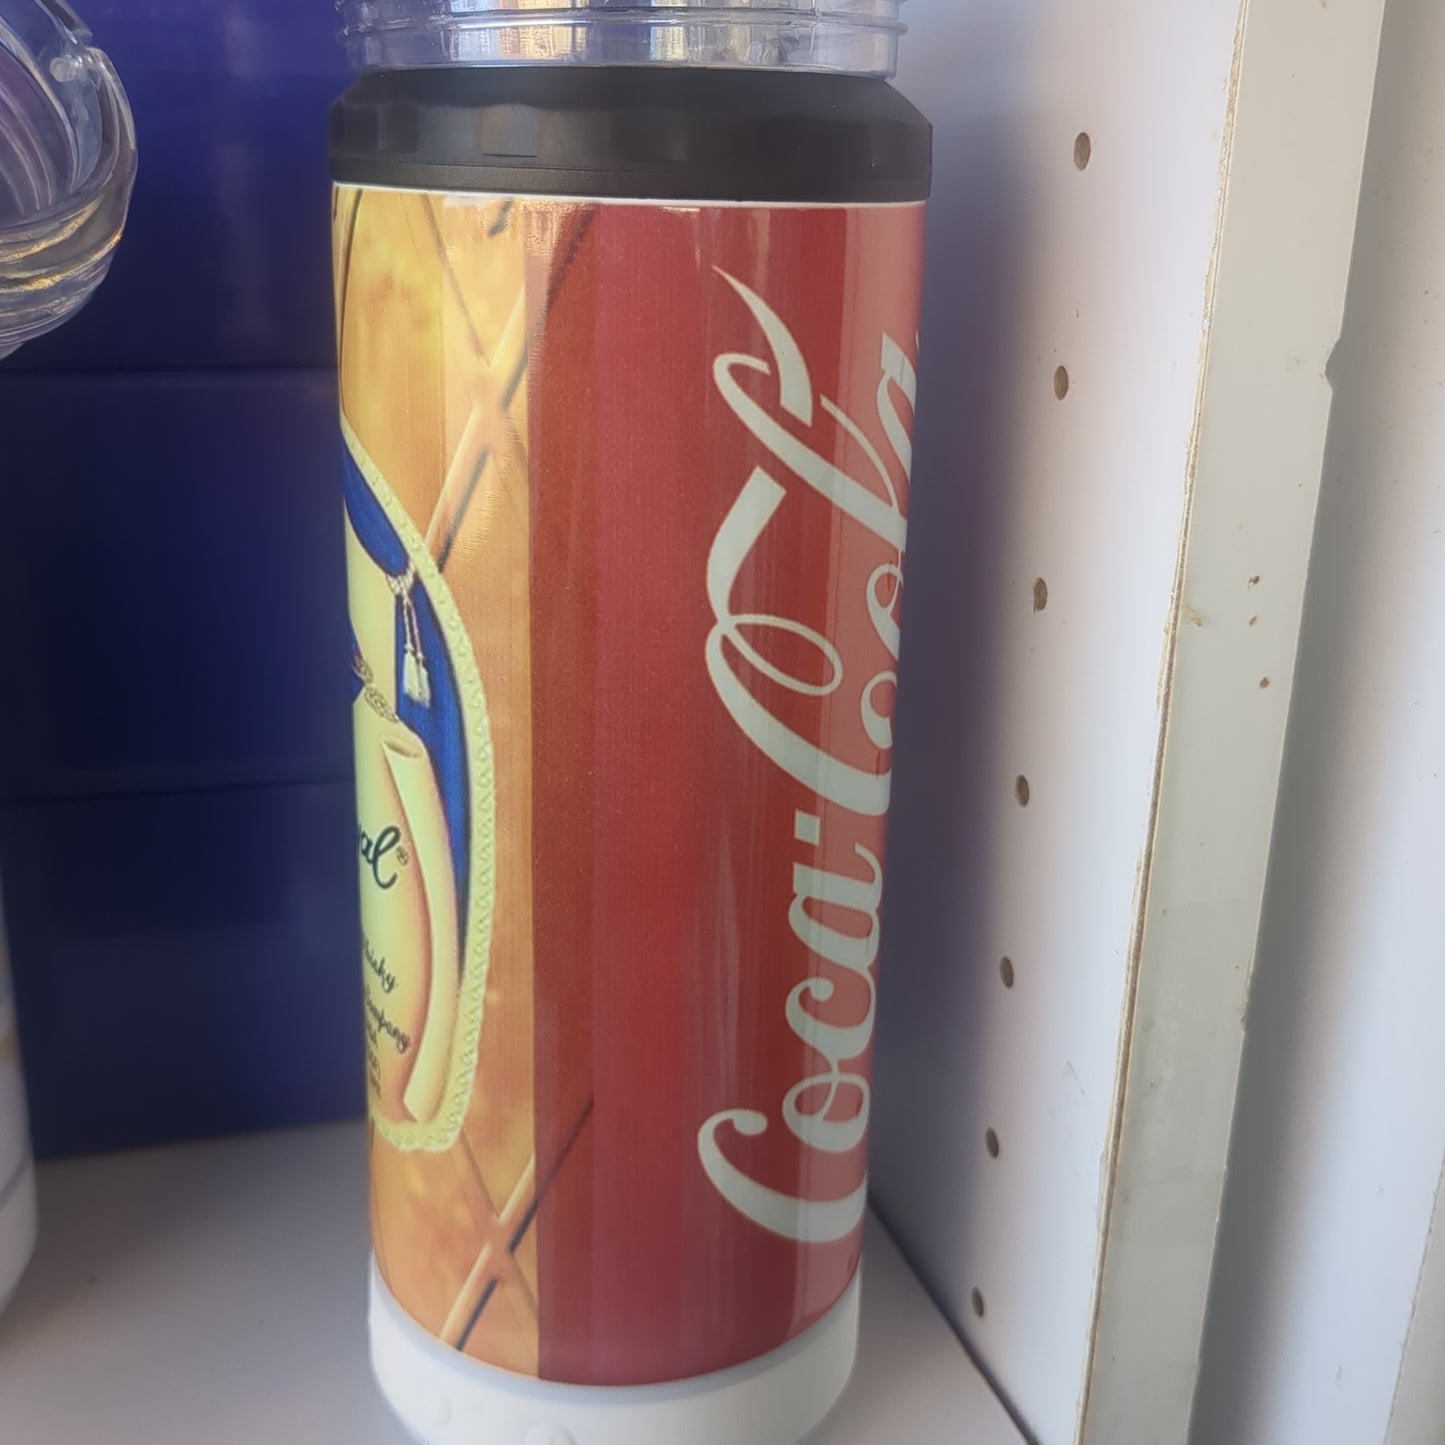 17 Oz Insulated Stainless Steel Tumbler With Bluetooth Speaker Tumblr Lid And Can Cooler. Cola And Spirits